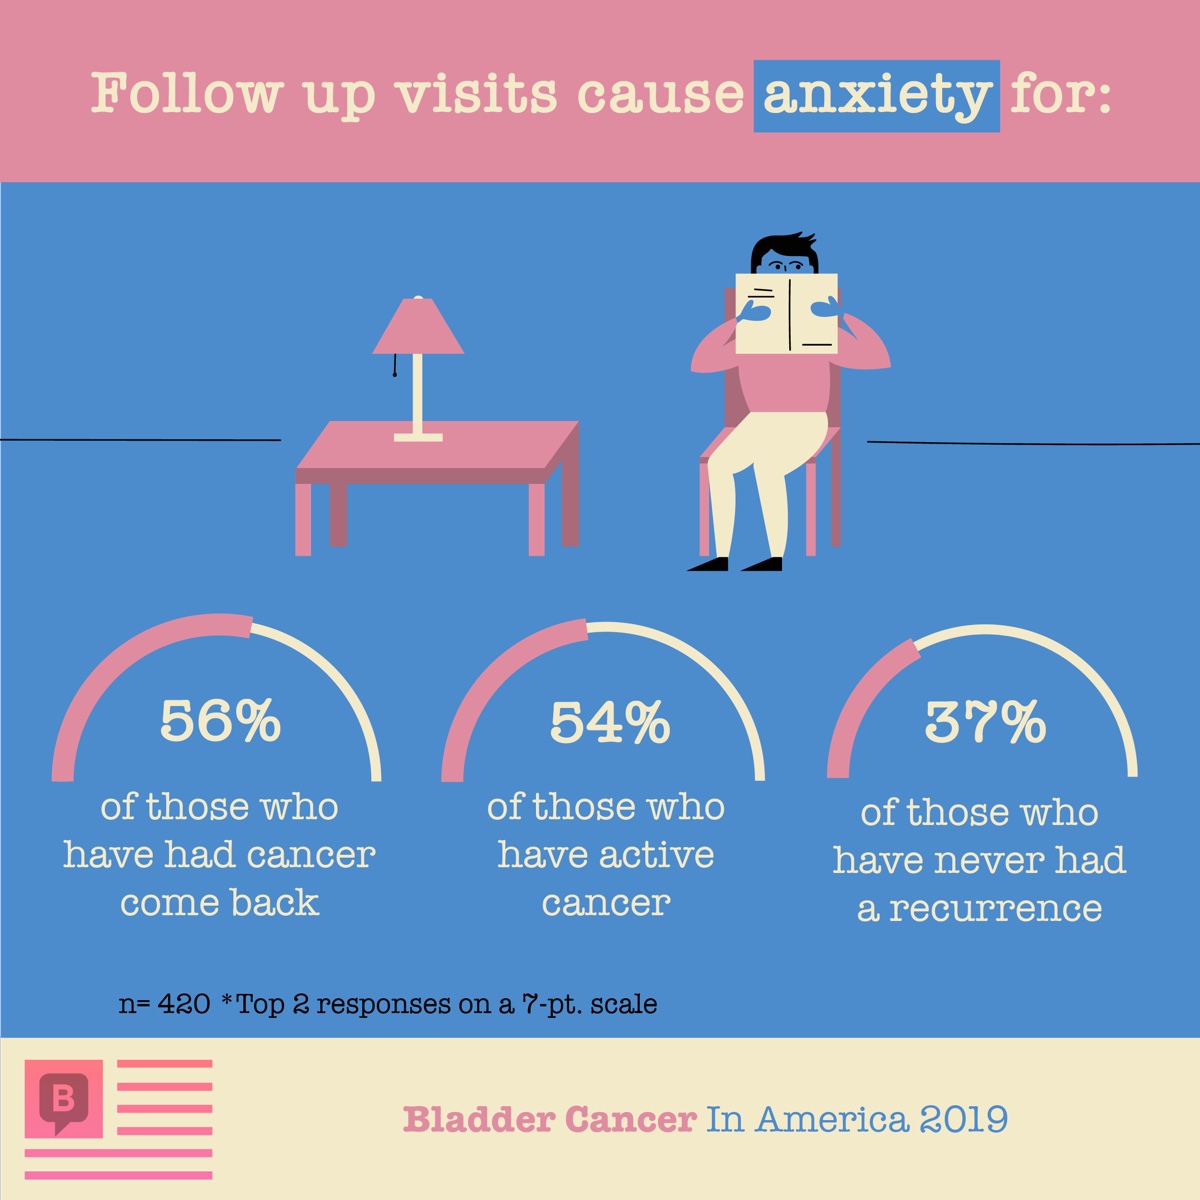 Follow-up visits cause anxiety for about half of those with active cancer or a past recurrence